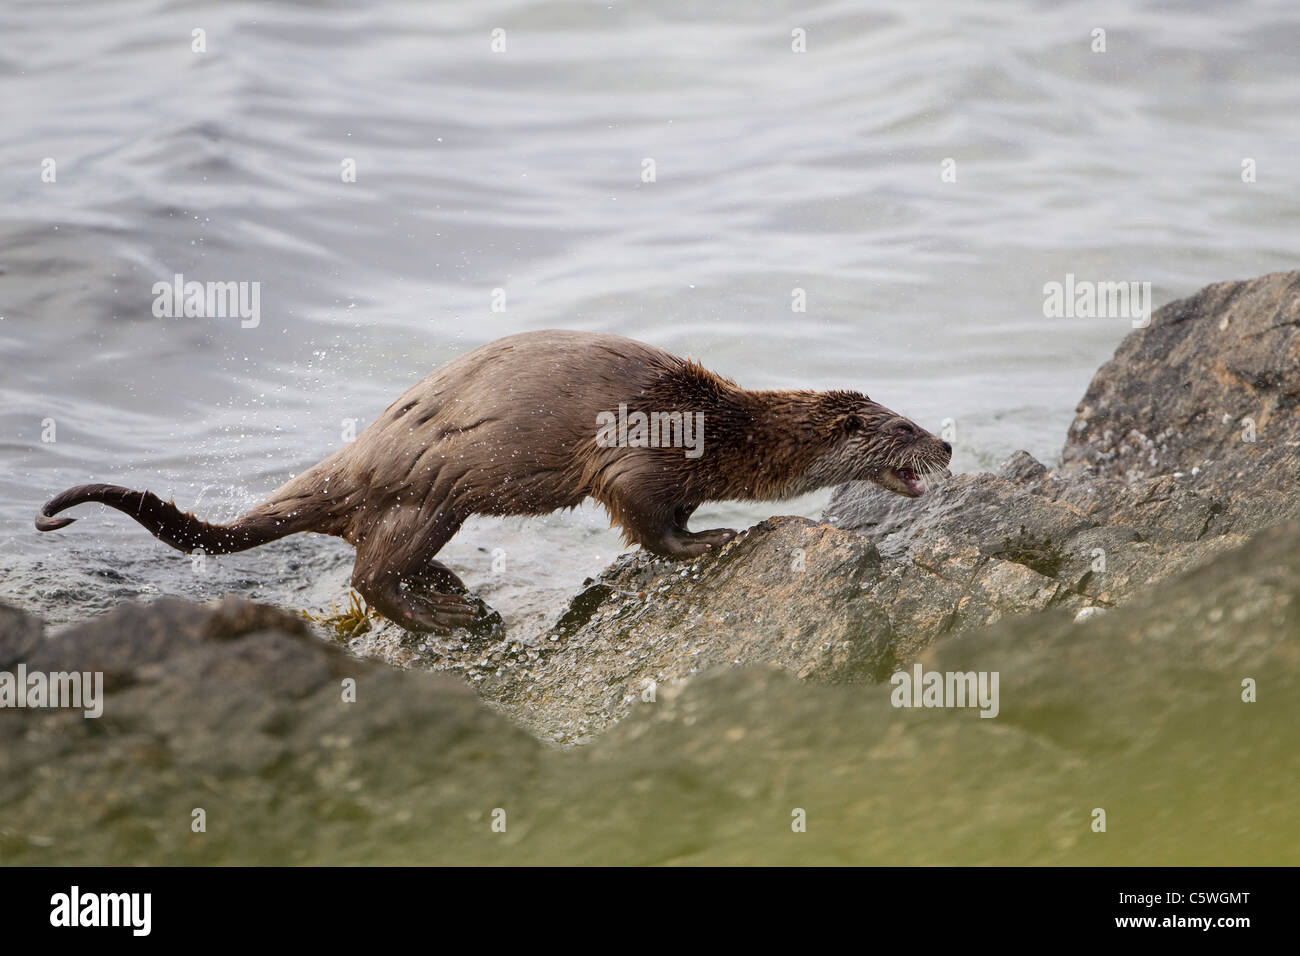 European River Otter (Lutra lutra) shaking water from coat on rocky coast. Shetland, Scotland, Great Britain. Stock Photo